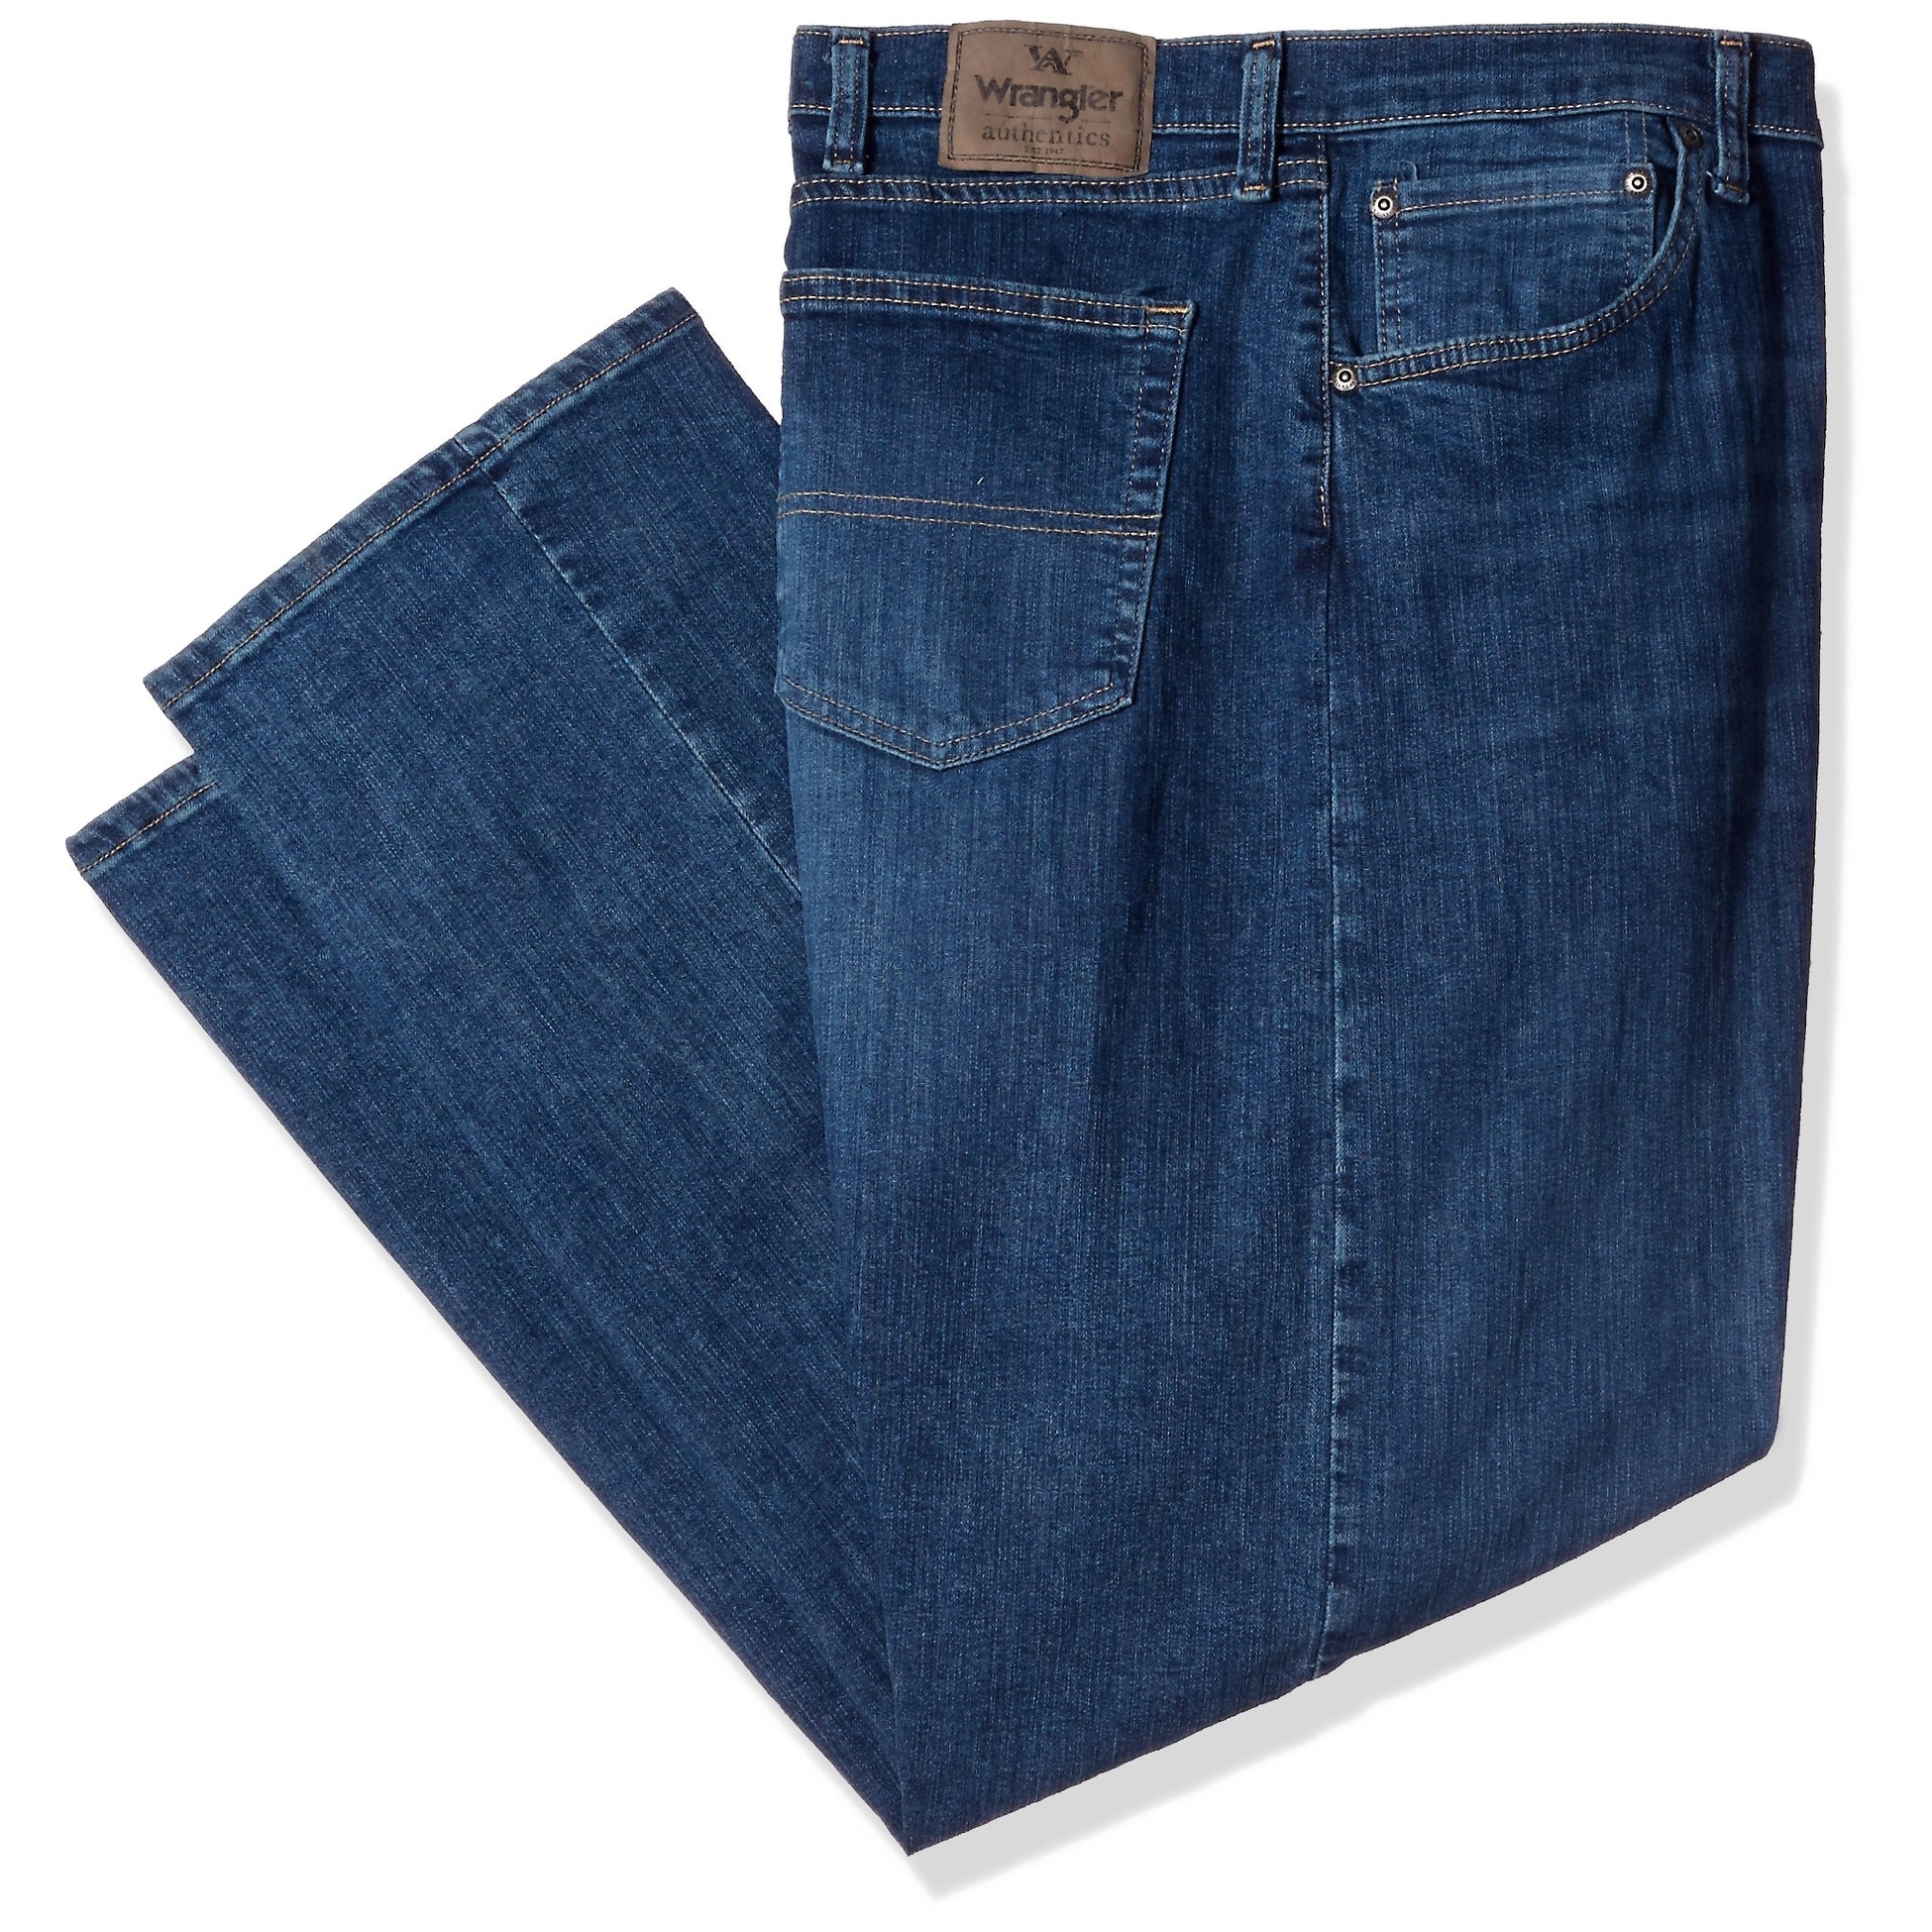 wrangler relaxed fit jeans 48 x 30